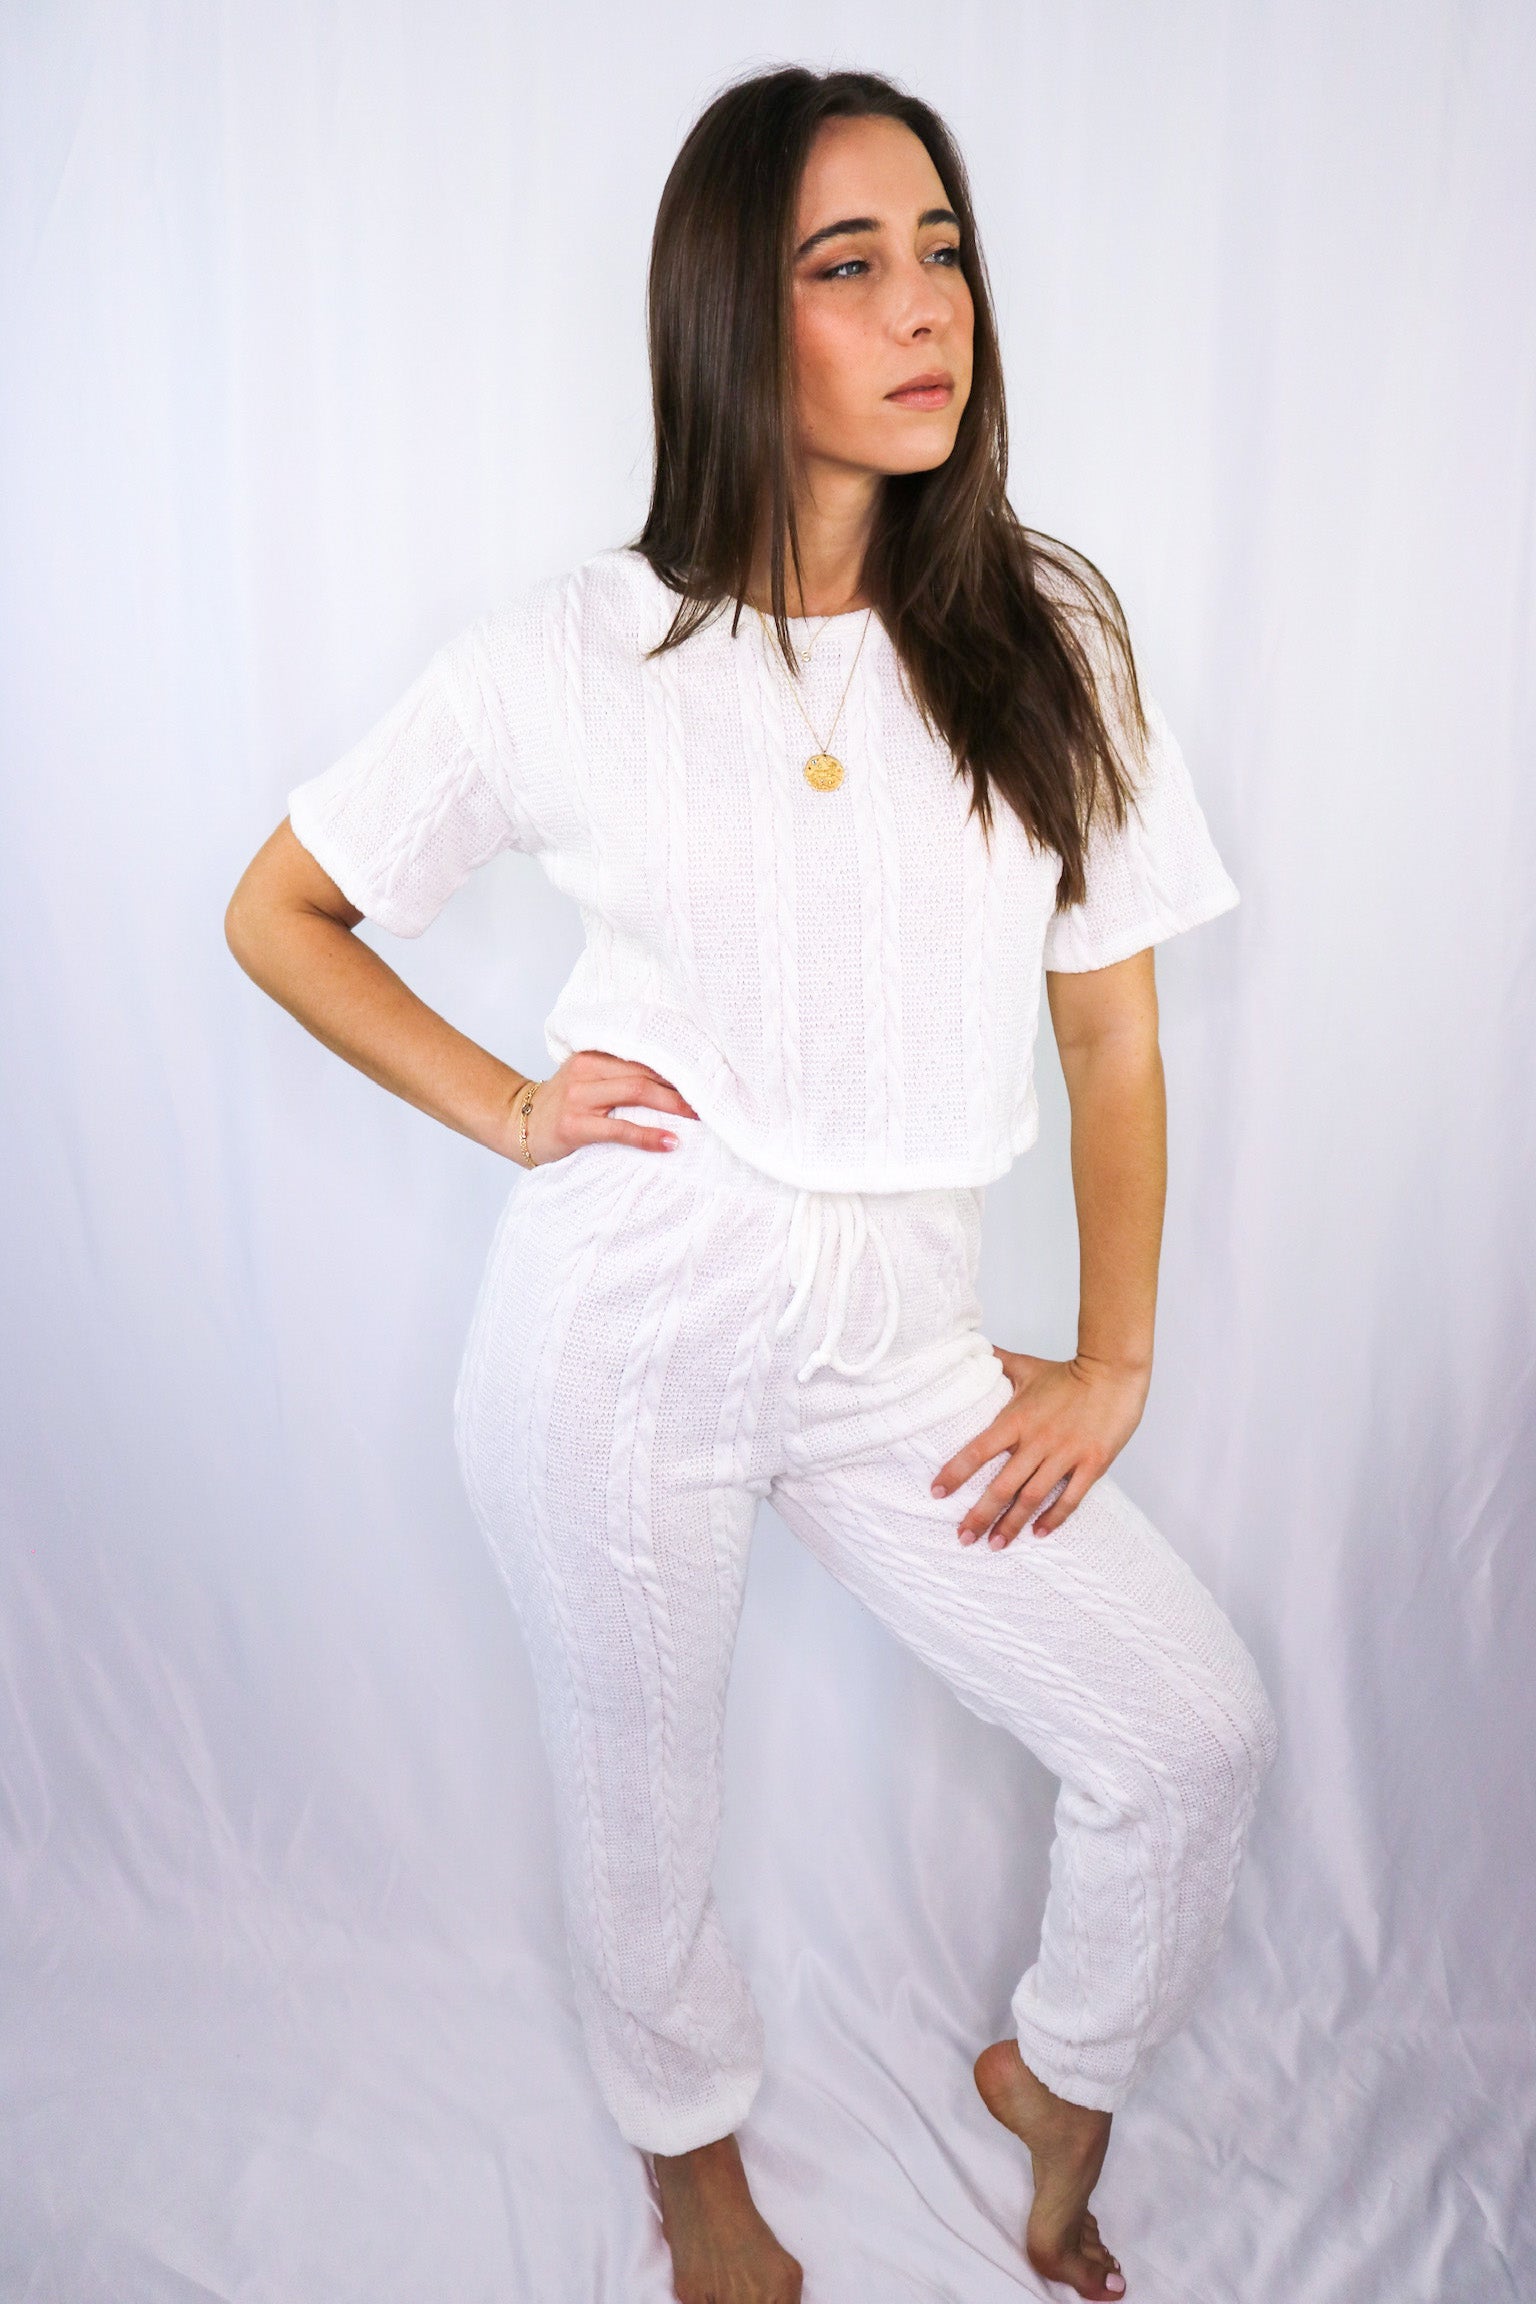 Knitted loungewear set in white (baby tee and matching knitted loungewear pants) for Scarlette The Label, an online fashion boutique for women.